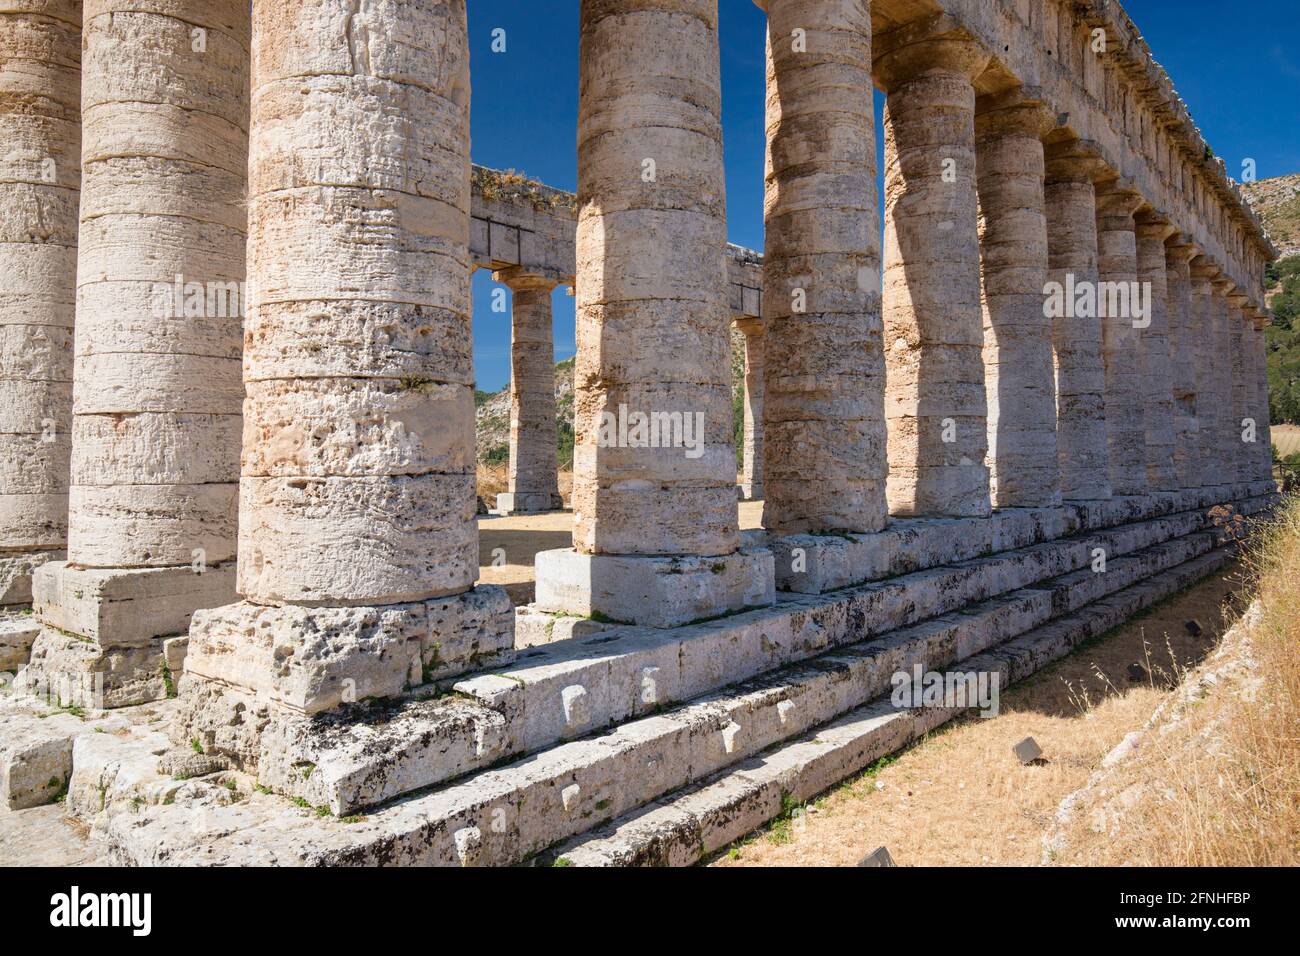 Calatafimi-Segesta, Trapani, Sicily, Italy. Stout stone columns forming part of the 5th century BC Doric temple at the Segesta archaeological site. Stock Photo